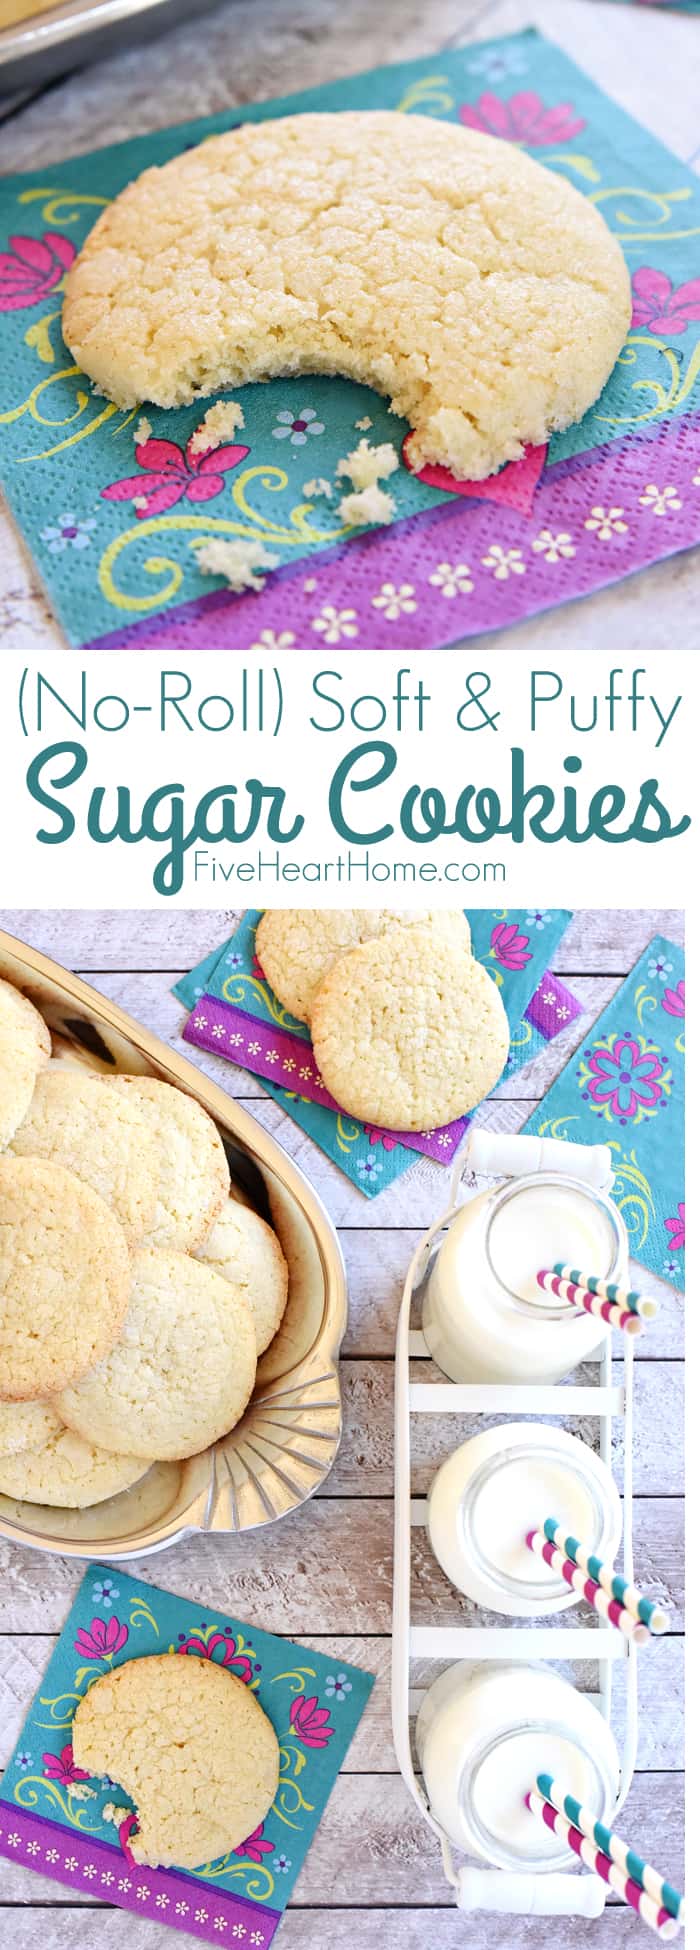 Soft Sugar Cookies, two-photo collage with text.